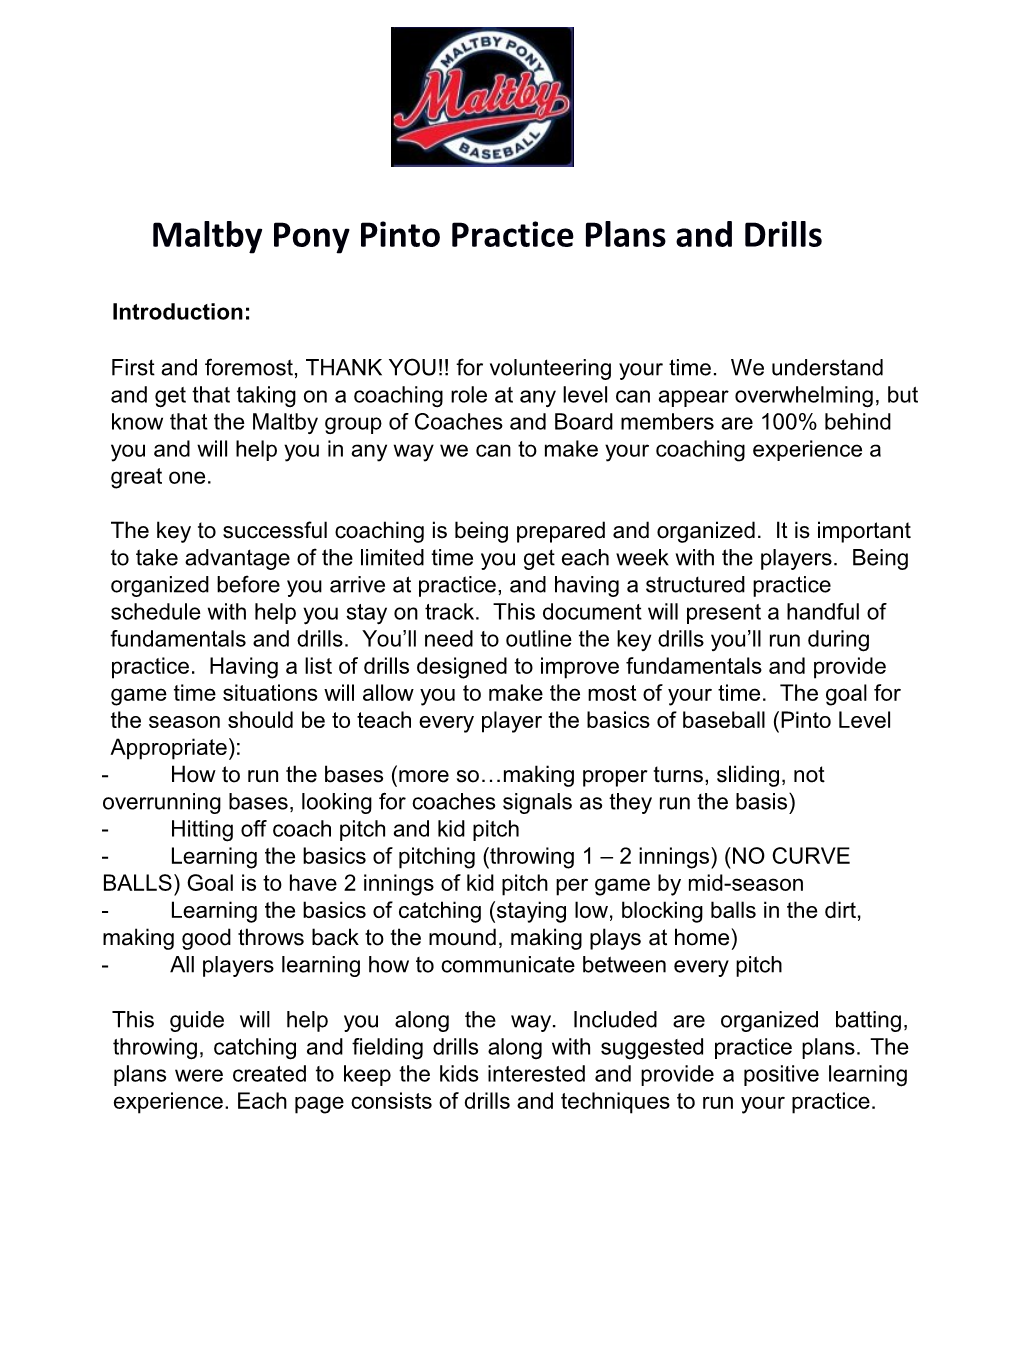 Maltby Pony Pinto Practice Plans and Drills